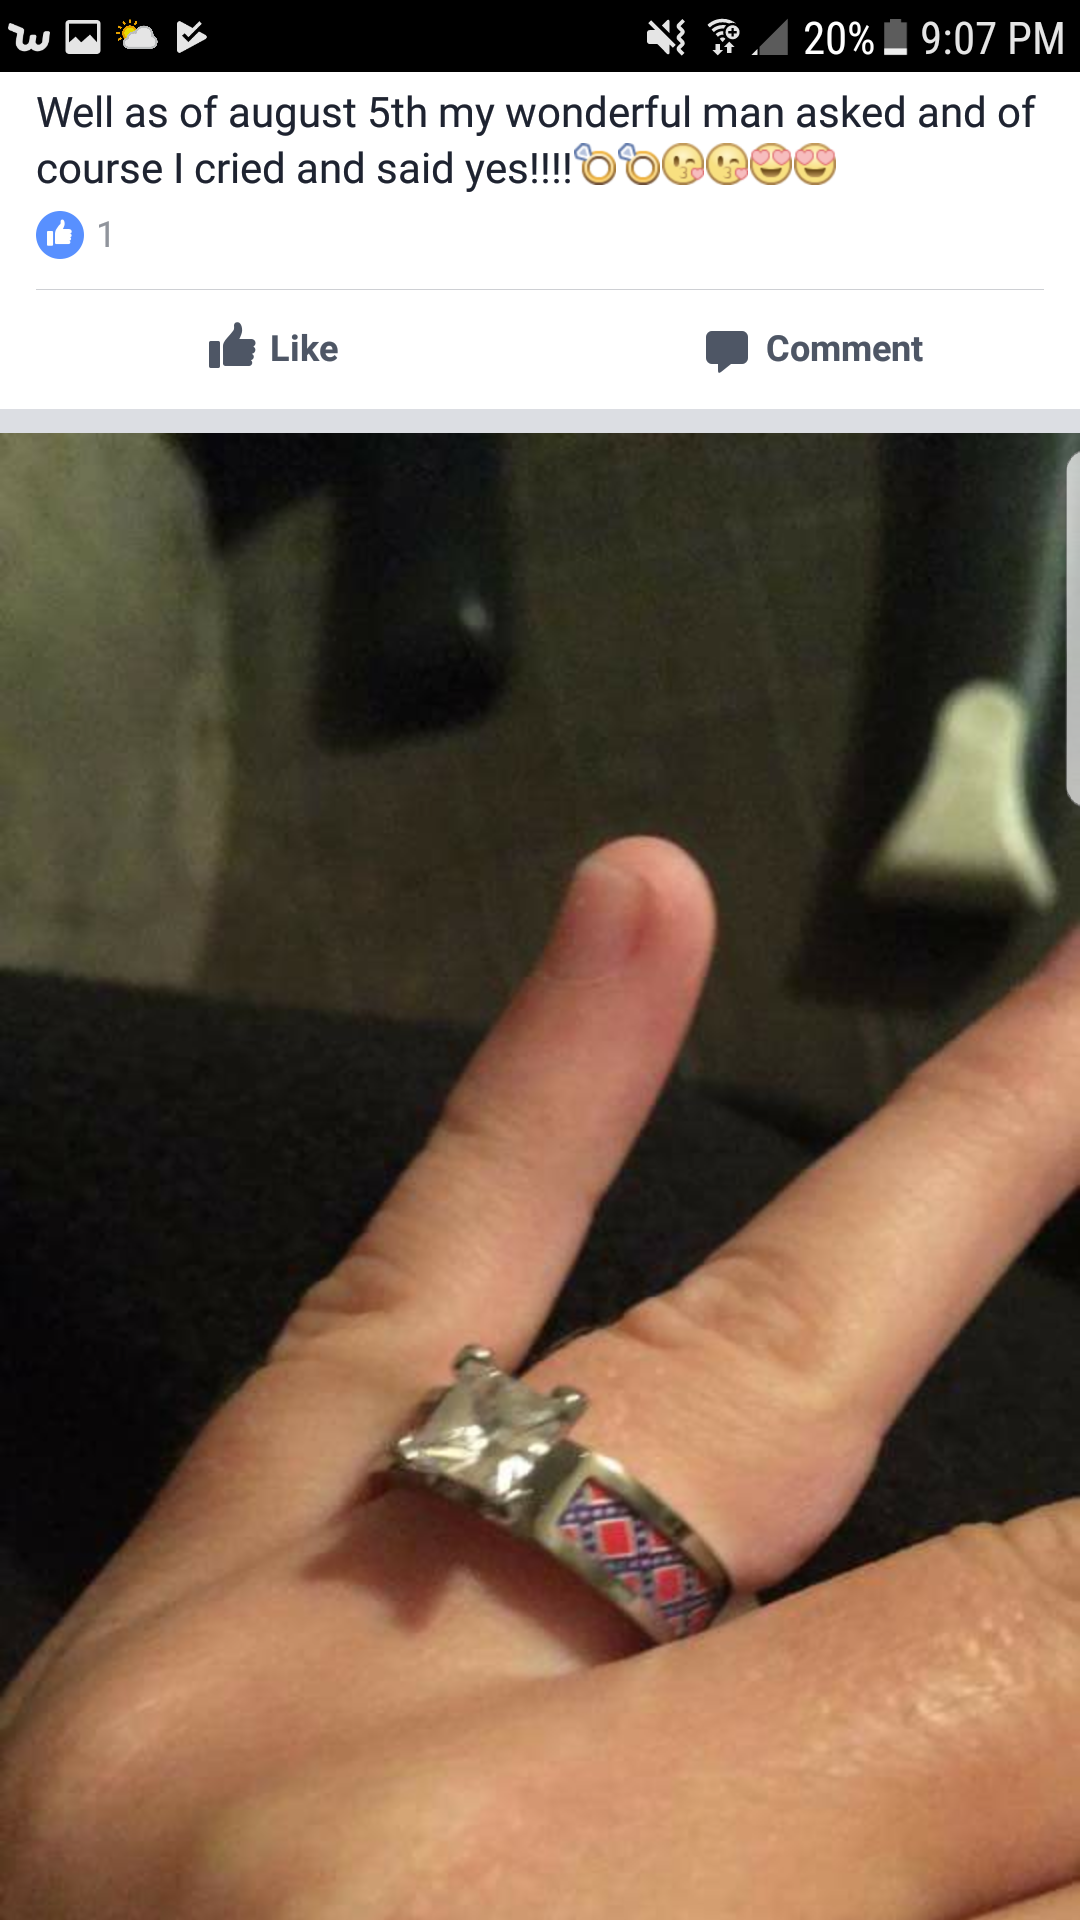 physically cringe photos that will make you cringe - 20% Well as of august 5th my wonderful man asked and of course I cried and said yes!!!! Obowo Comment Wa